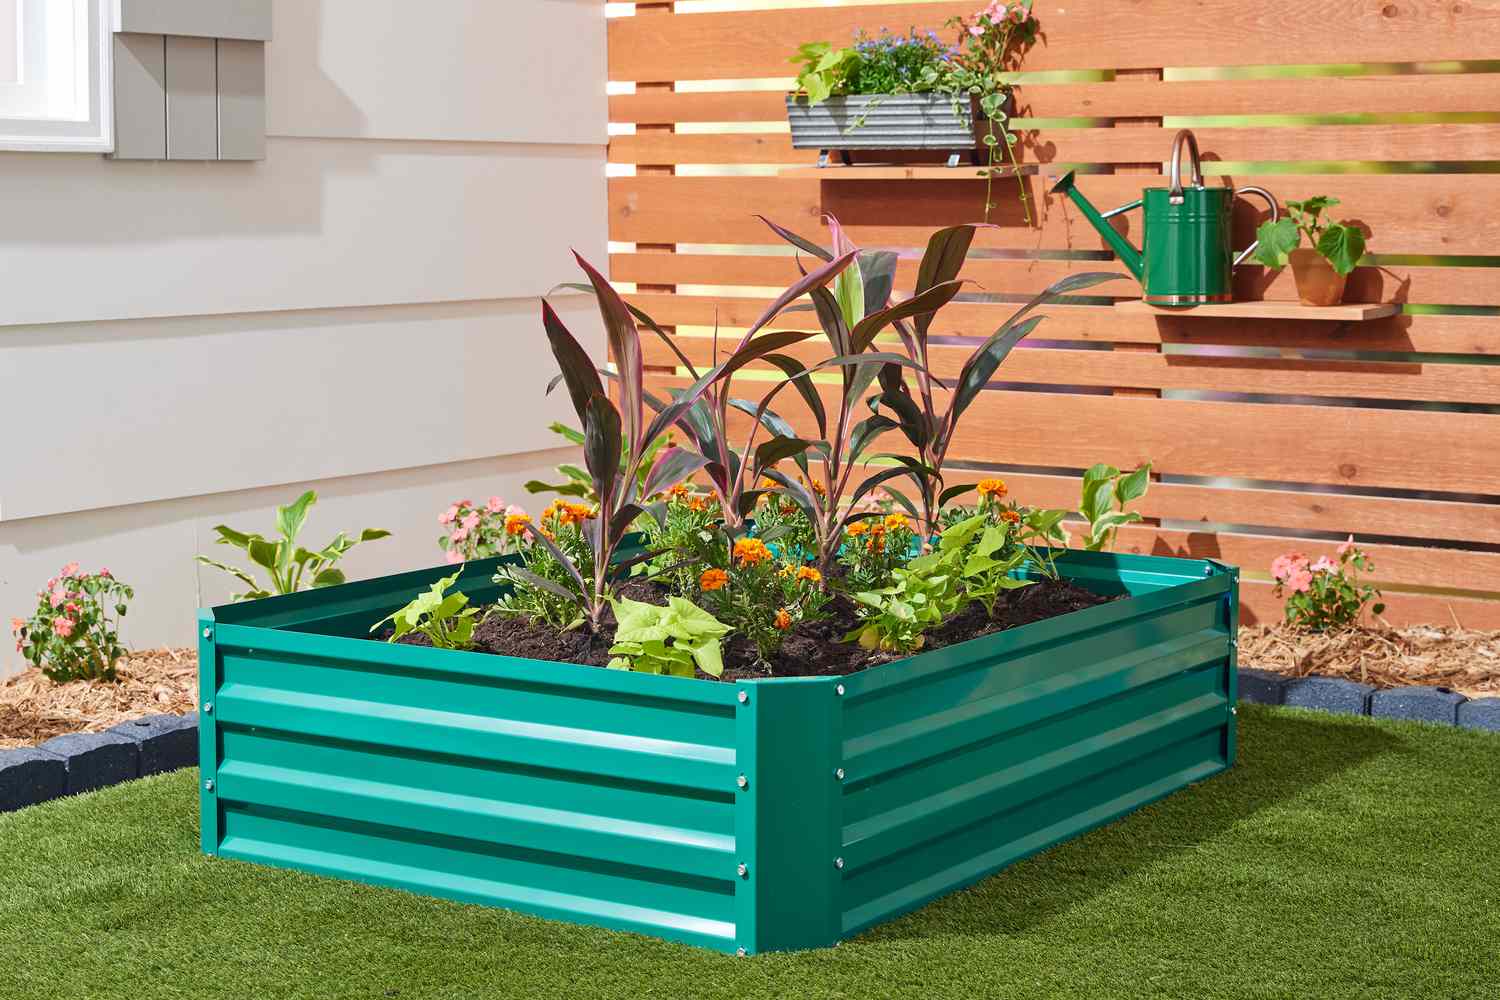 Creating an Eco-friendly Garden Bed: A Step-by-Step Guide for Healthy and Natural Growth